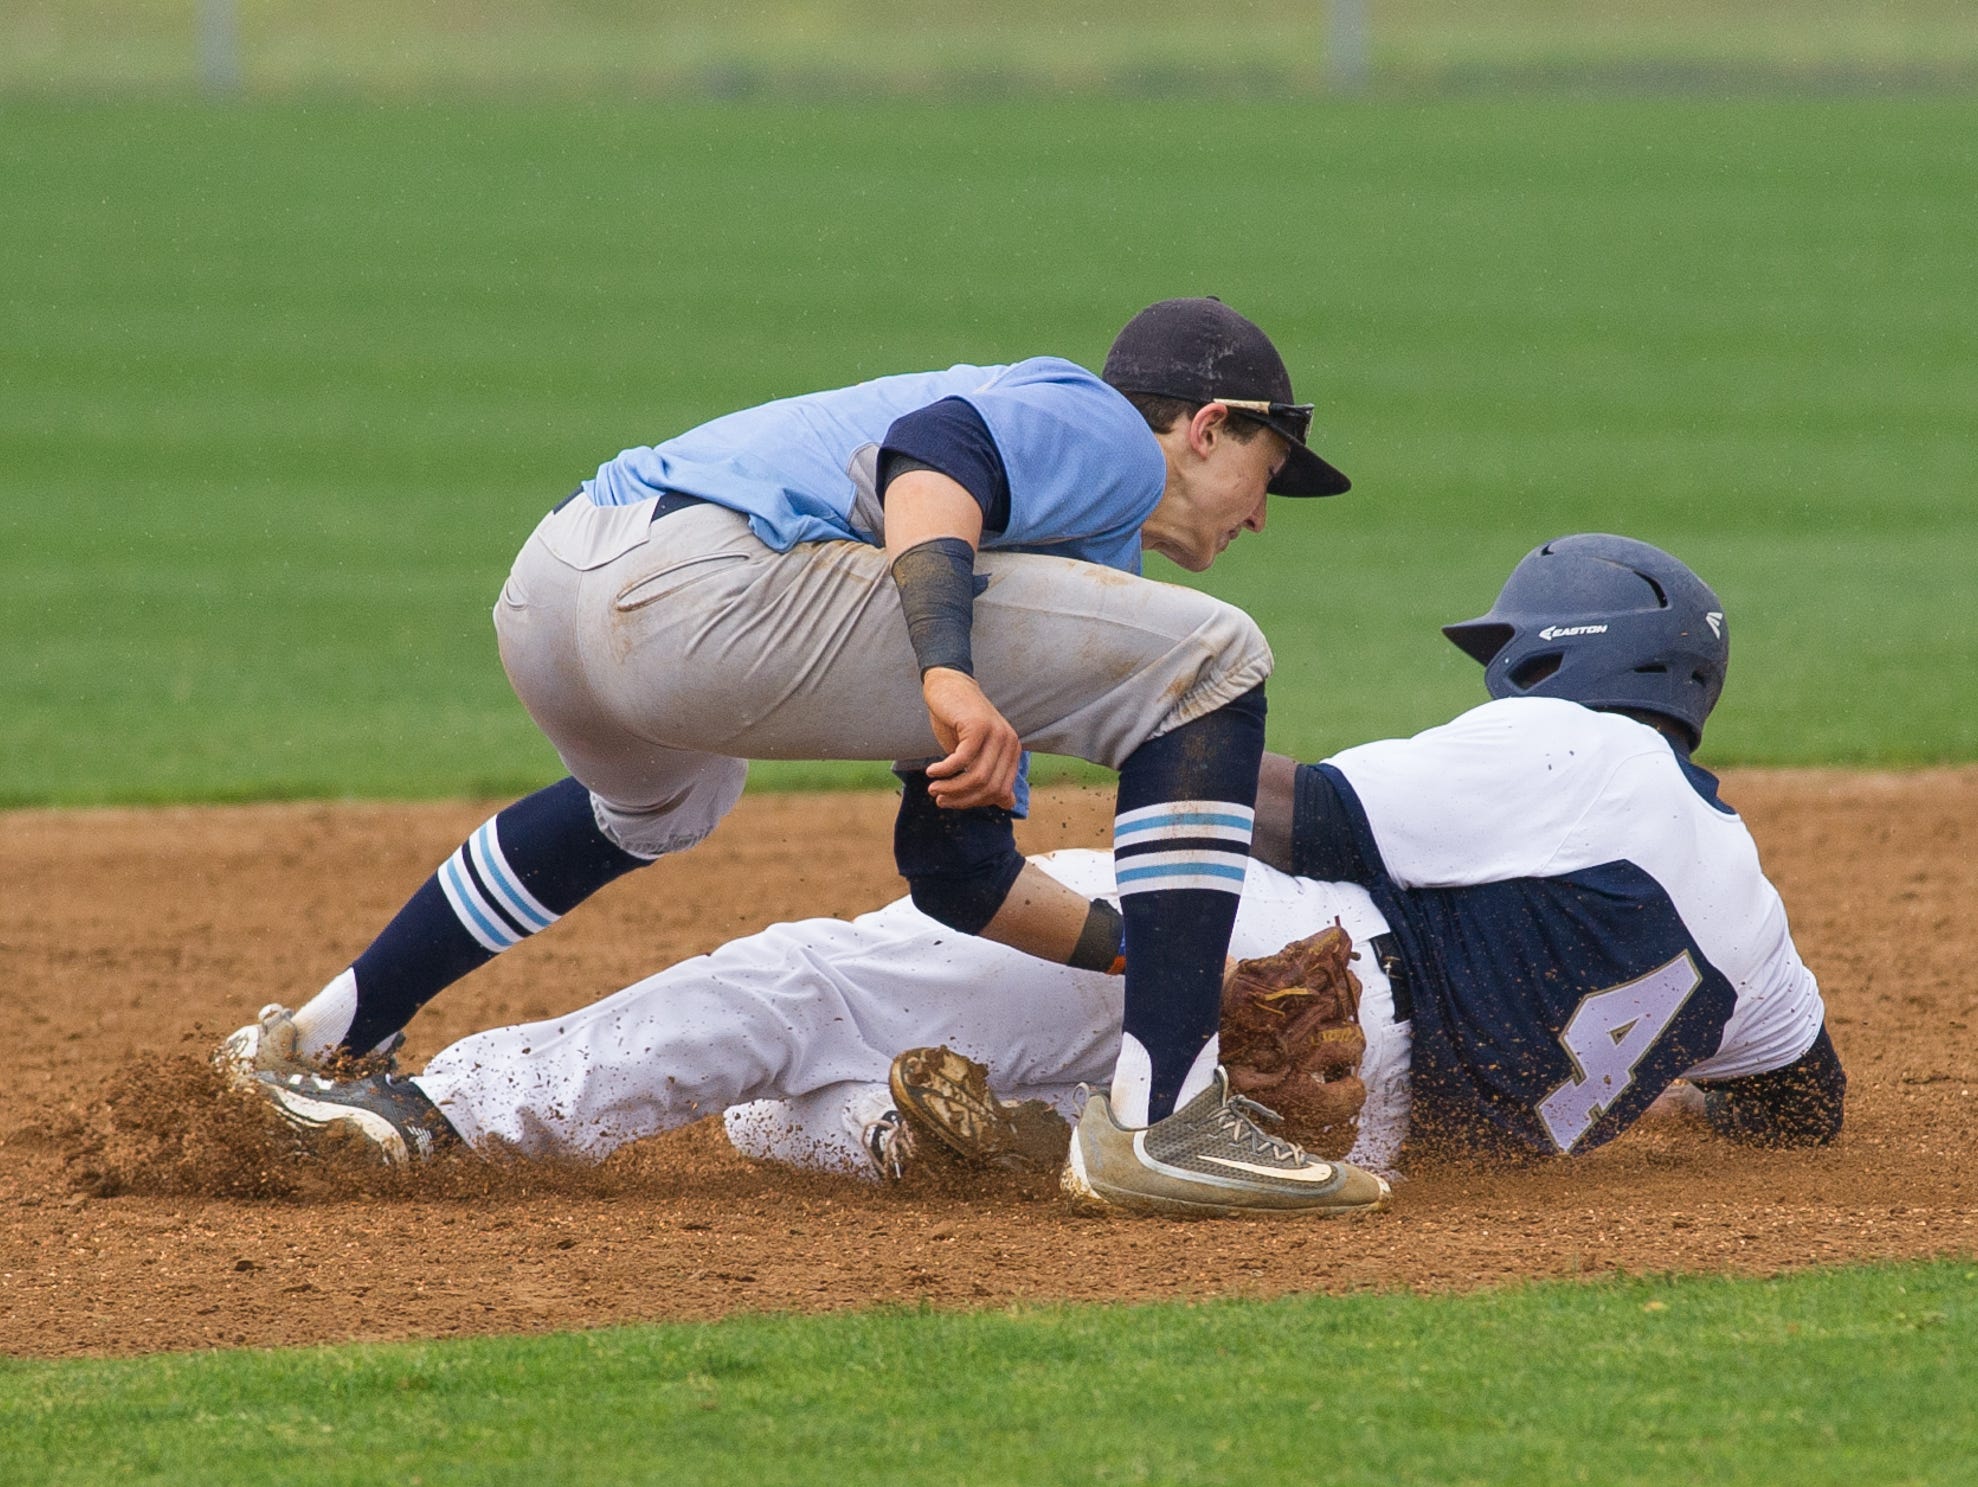 Cape Henlopen's pitcher Zachary Gelof (11) tags out Salesianum's Joshua Patrick (4) out at second base.